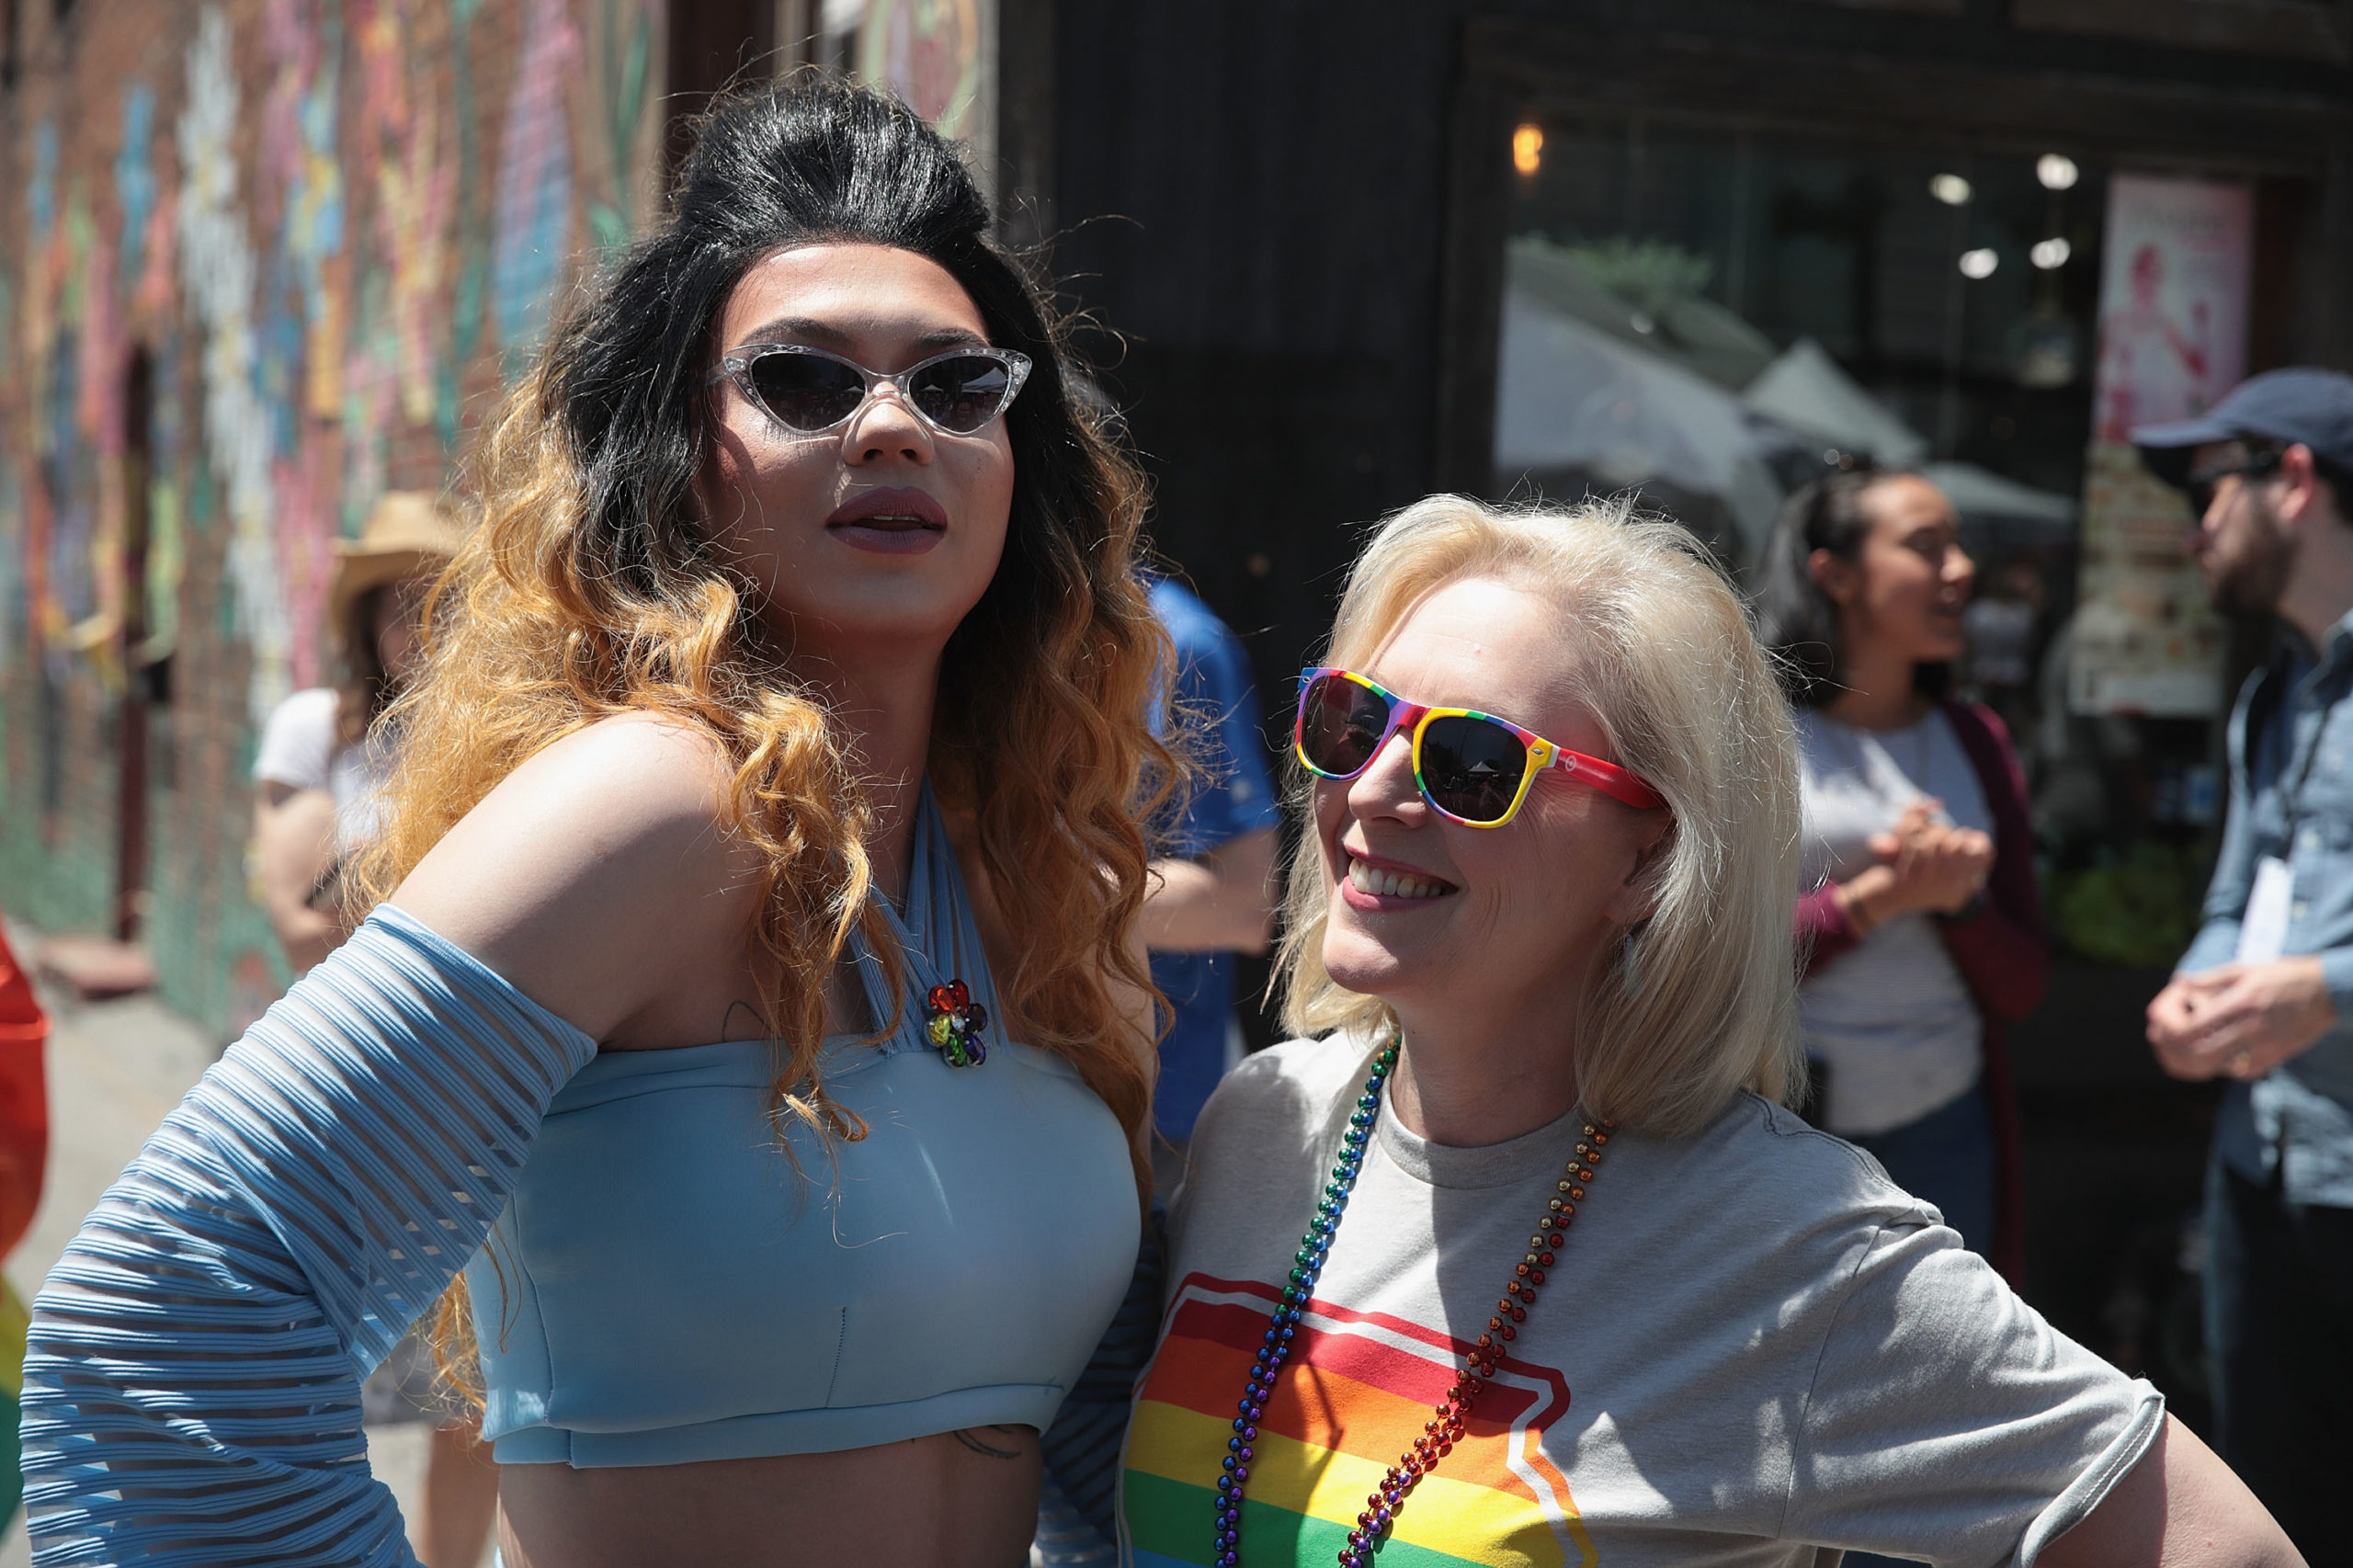 Democratic presidential candidate and New York senator Kirsten Gillibrand (R) tours the Capital City Pride Fest with drag queen Vana Rosenberg on June 08, 2019 in Des Moines, Iowa. Most of the more than 20 candidates seeking the Democratic nomination for president are campaigning at various locations in Iowa this weekend. (Photo by Scott Olson/Getty Images)